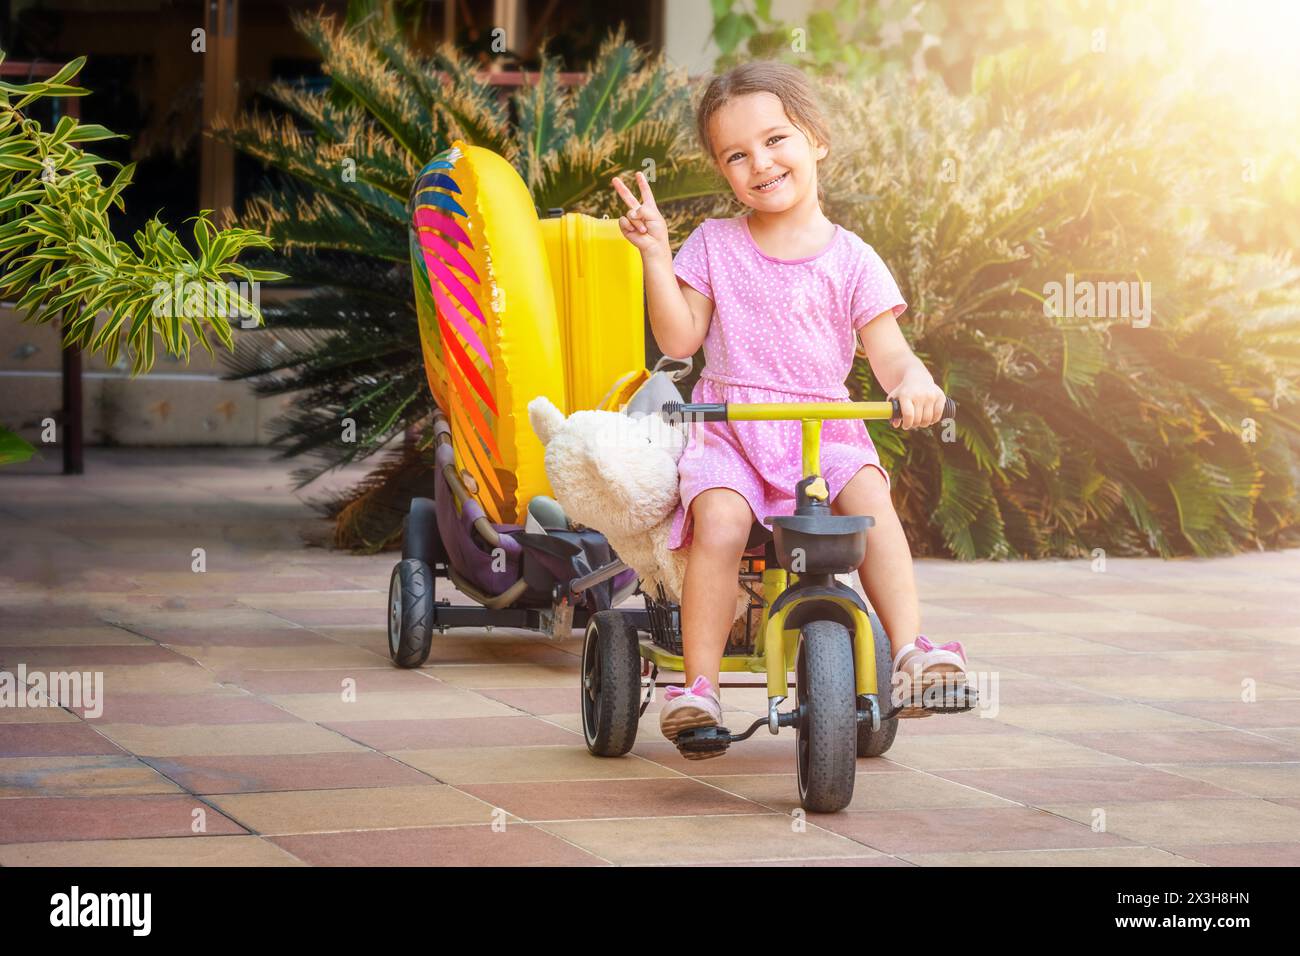 Portrait of a happy child riding a bicycle in the backyard Stock Photo